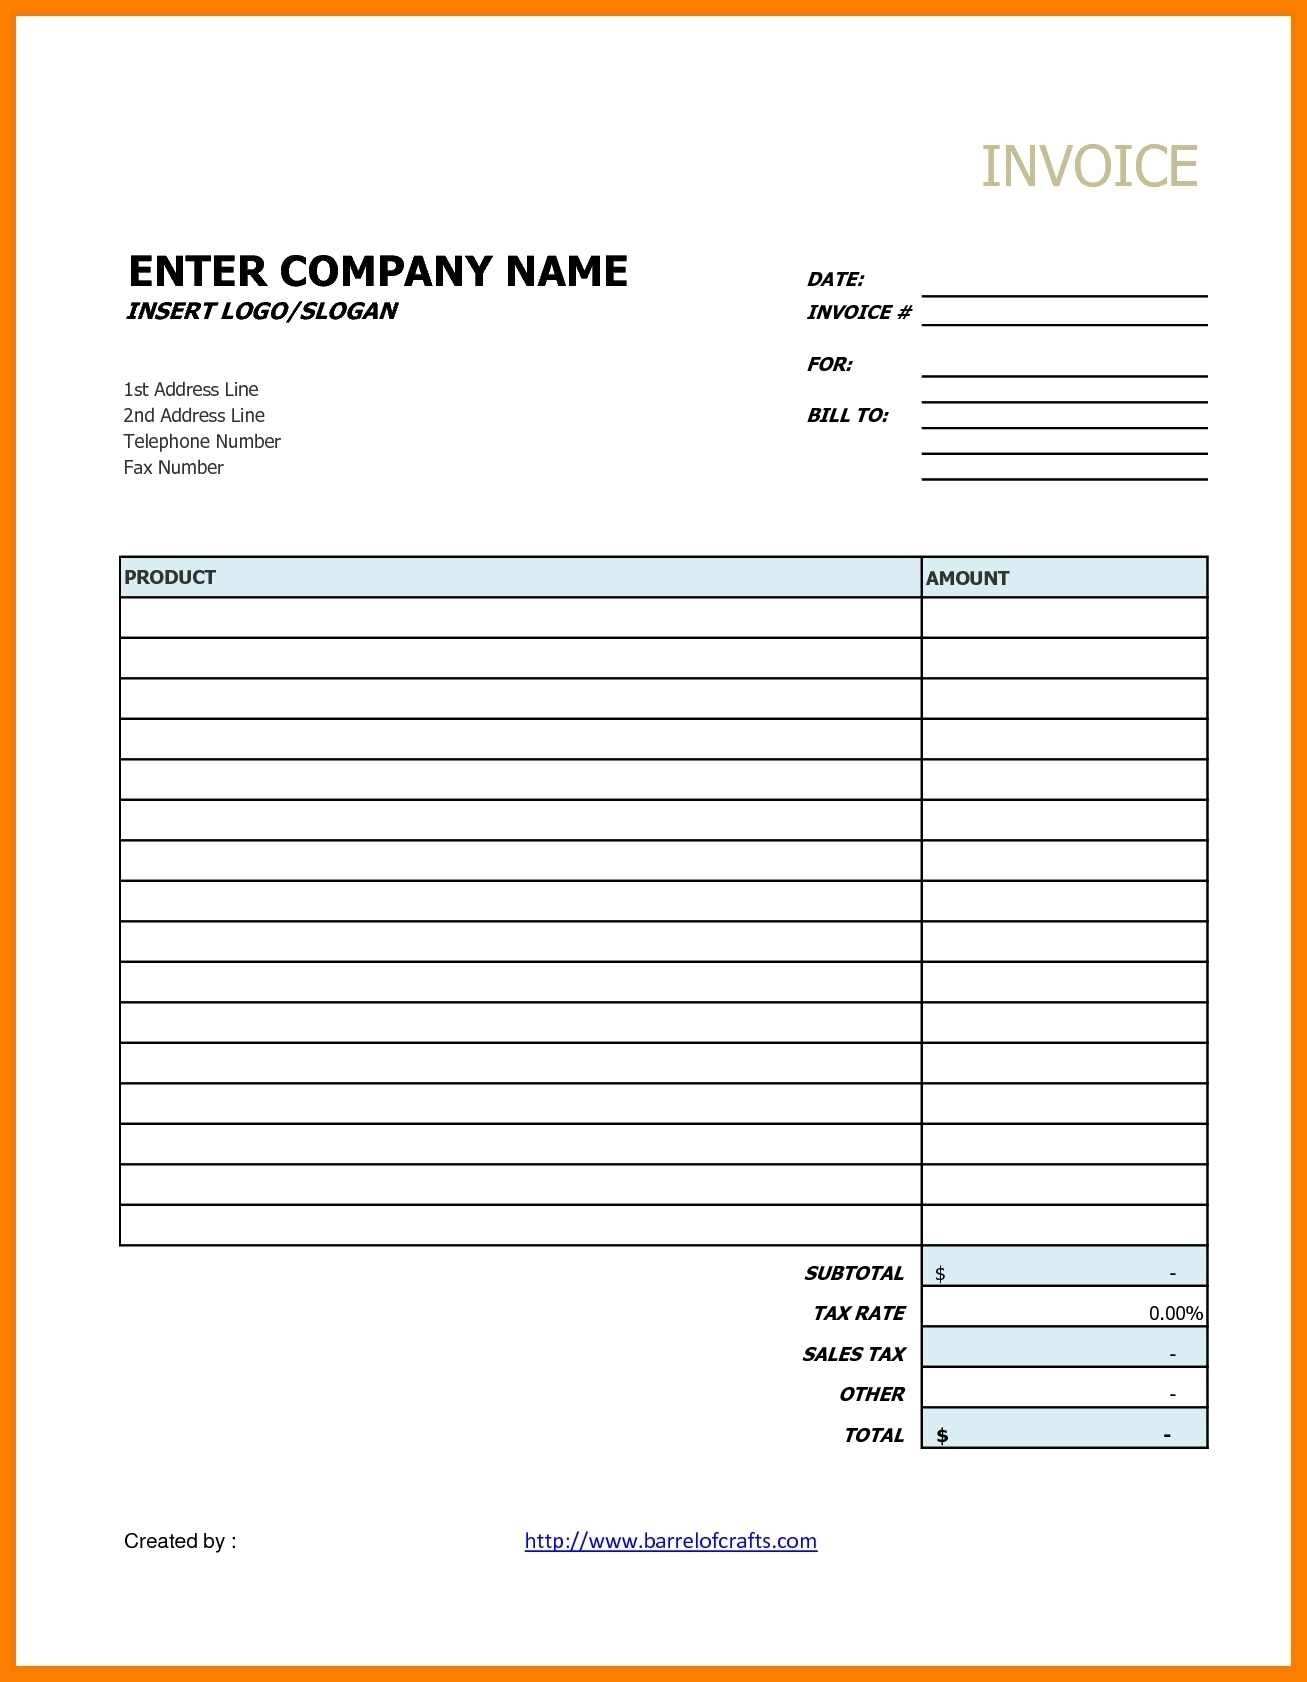 Sample Of Blank Invoice Forms Cards Design Templates